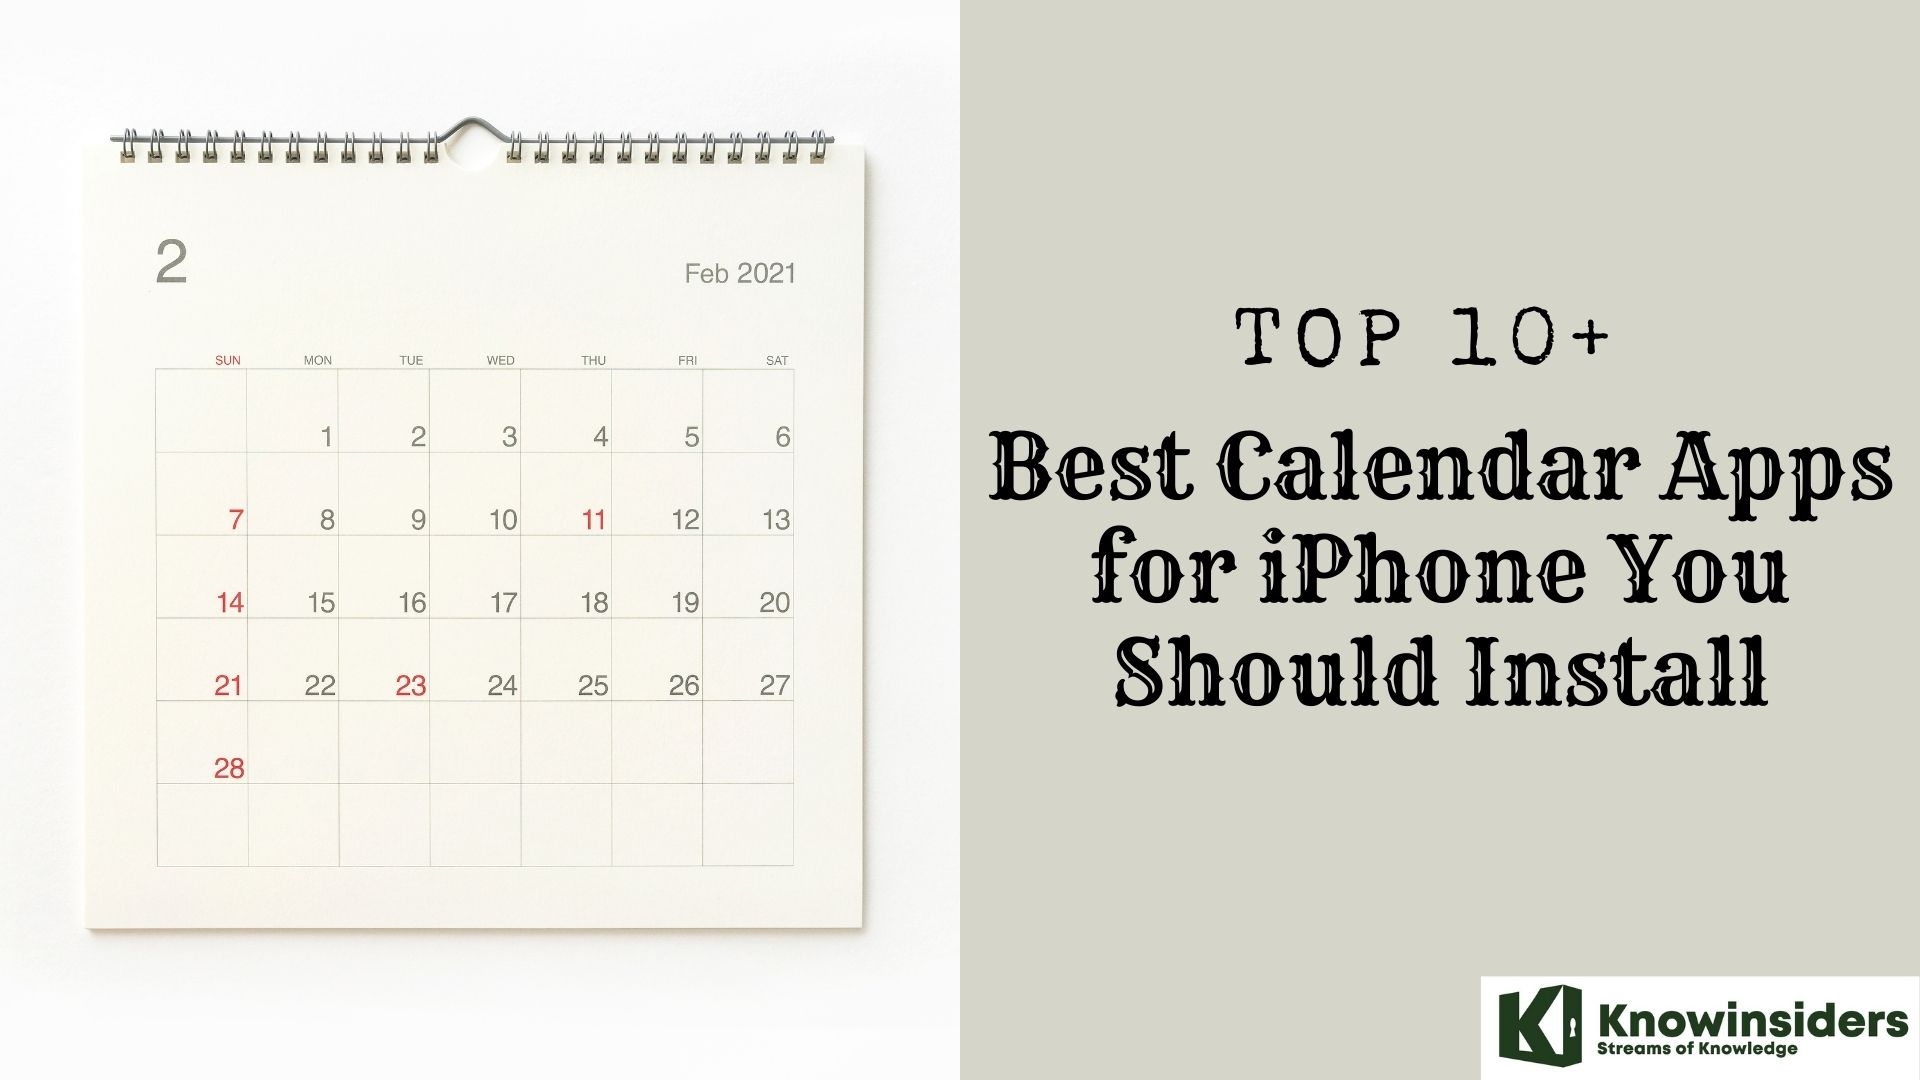 Top 10+ Best Calendar Apps for iPhone You Should Install